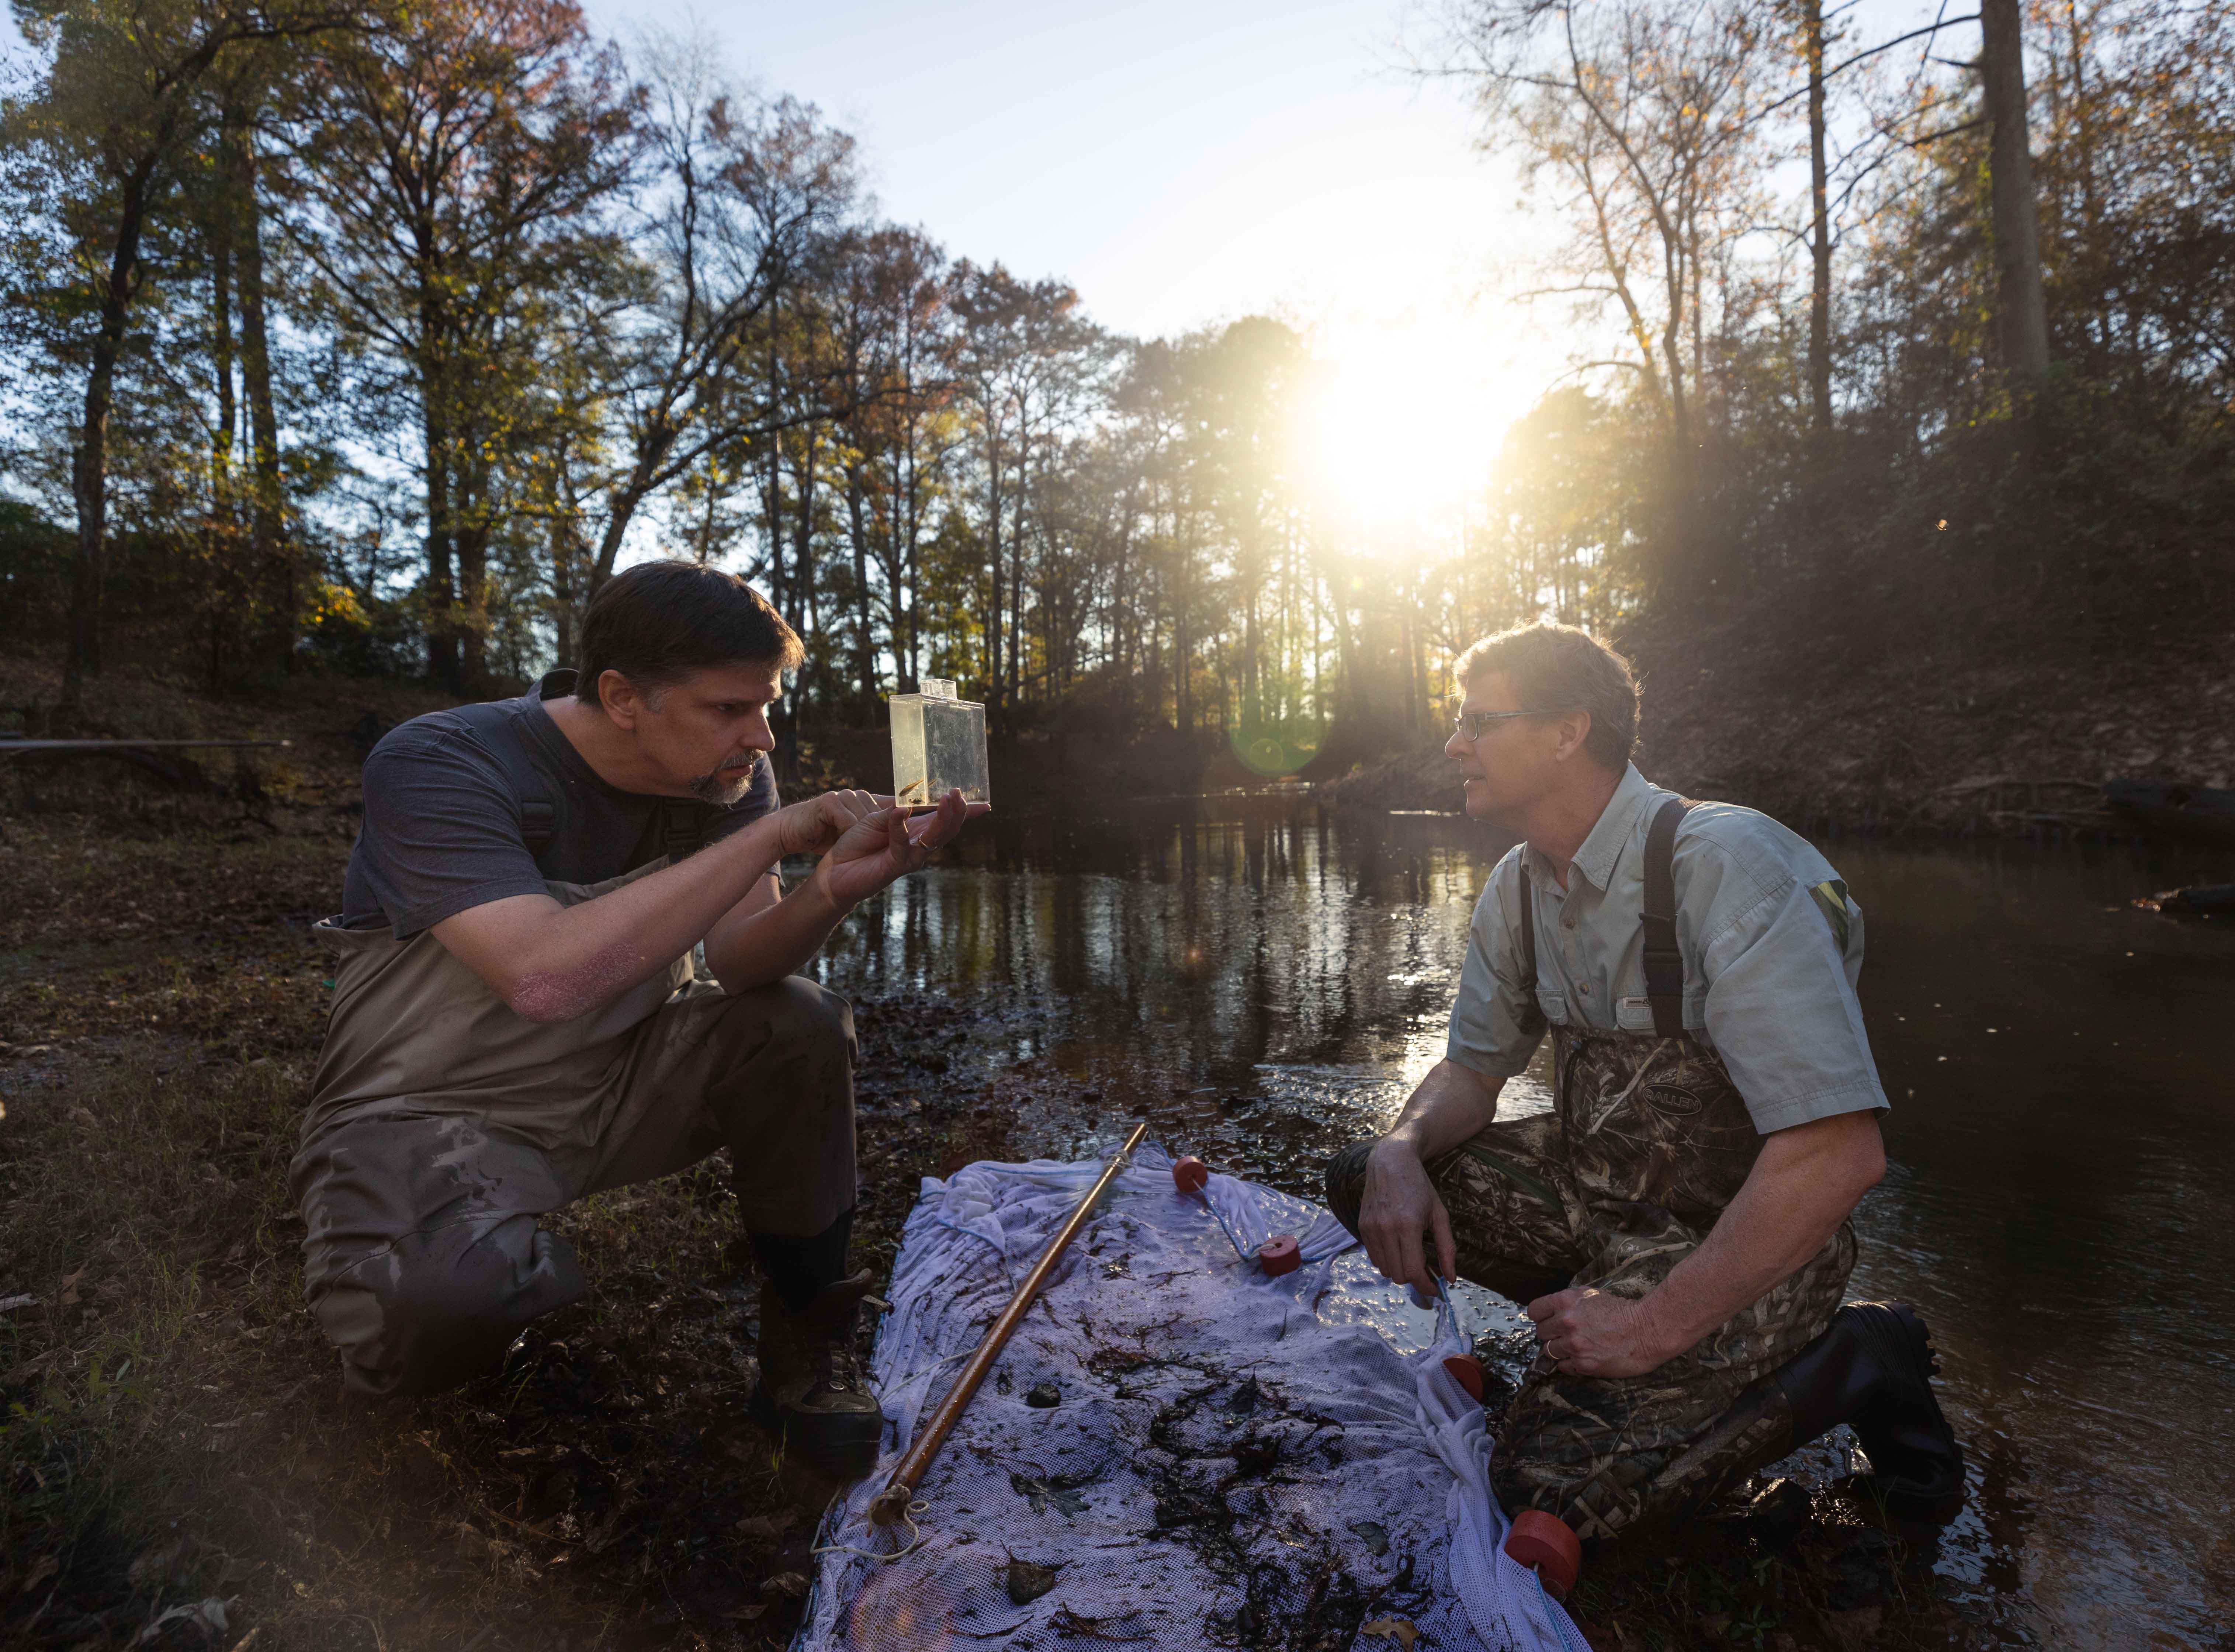 Two men examine a water sample pulled from a lake.